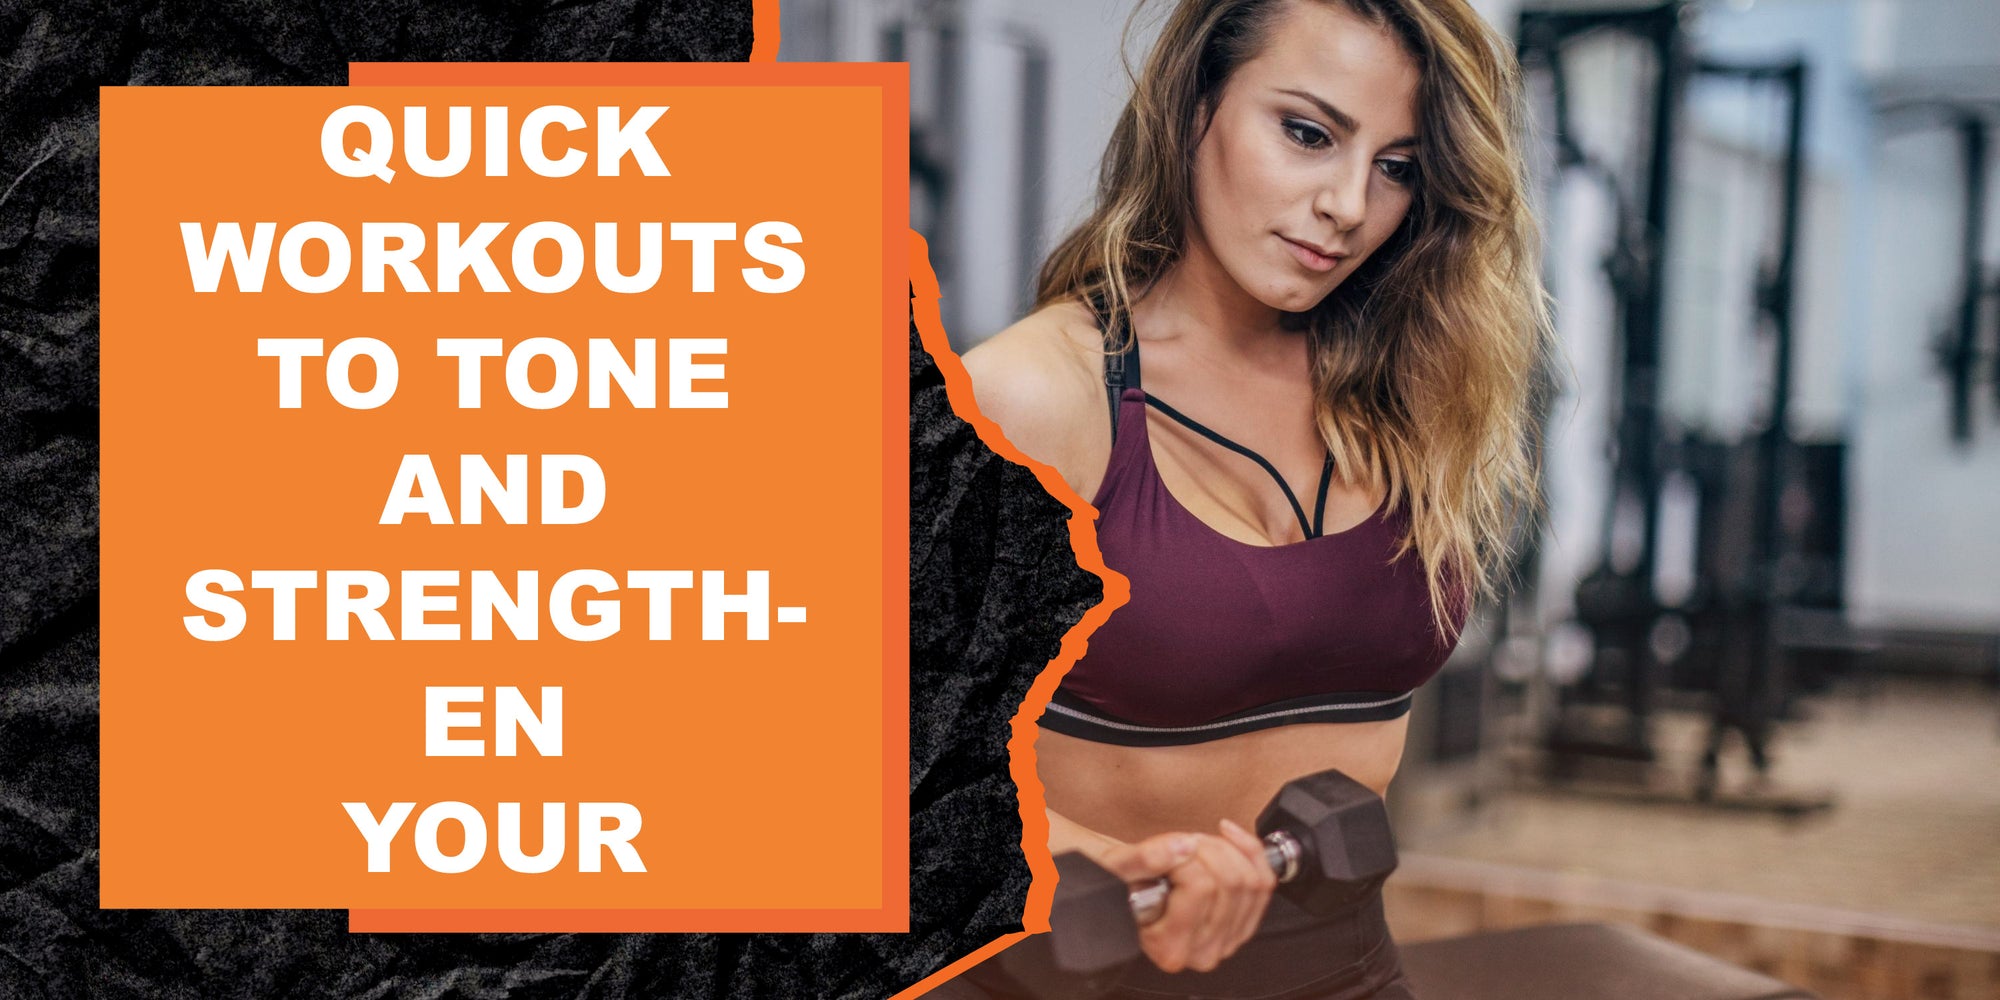 Quick Workouts to Tone and Strengthen Your Entire Body